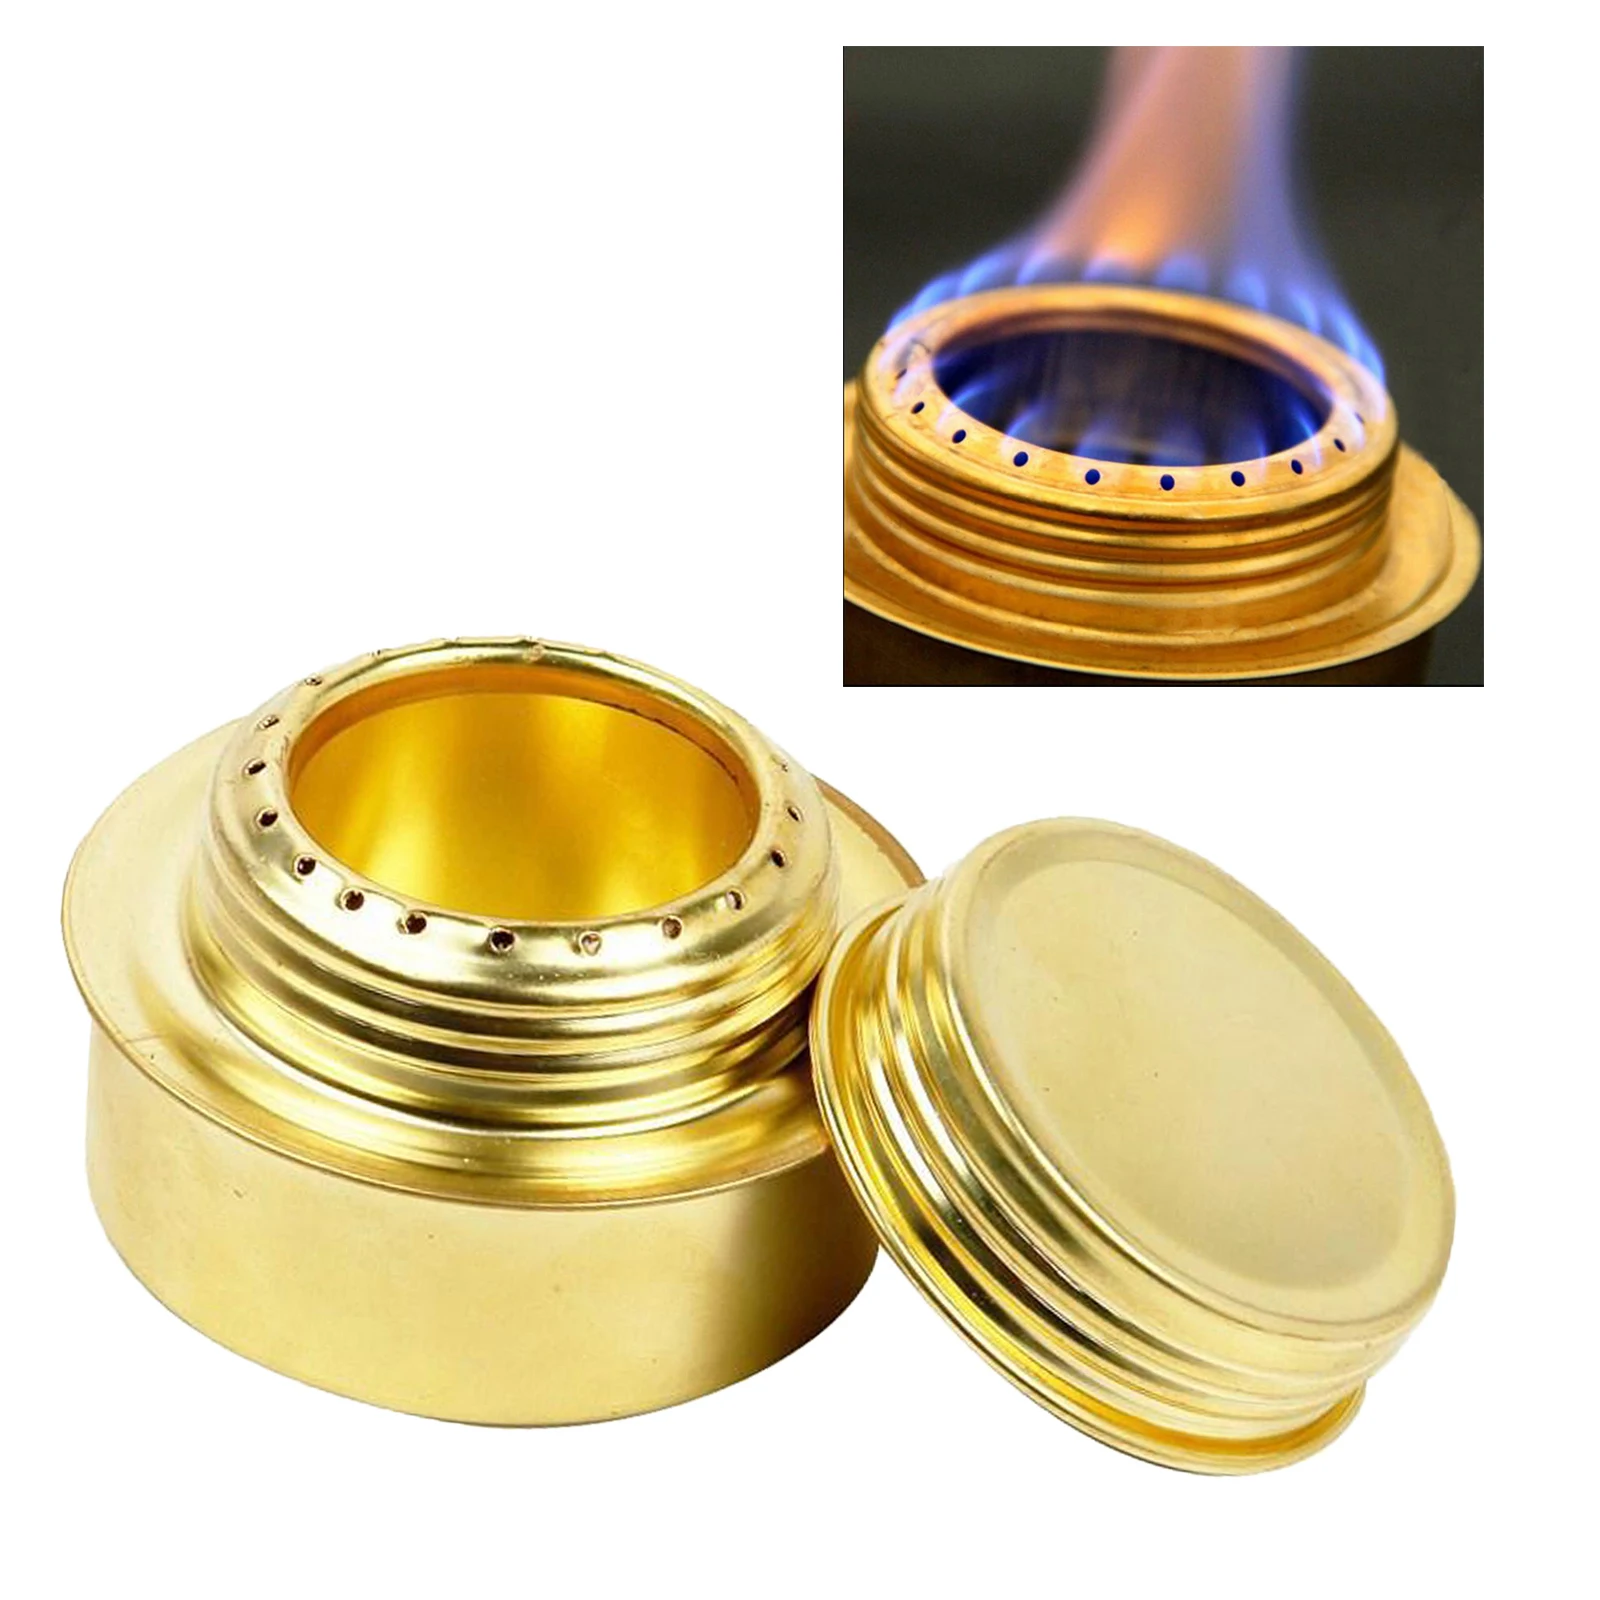 Copper Alloy Alcohol Stove Outdoor Mini Spirit Burner, Alcohol Cooker for Picnic Camping Backpacking BBQ